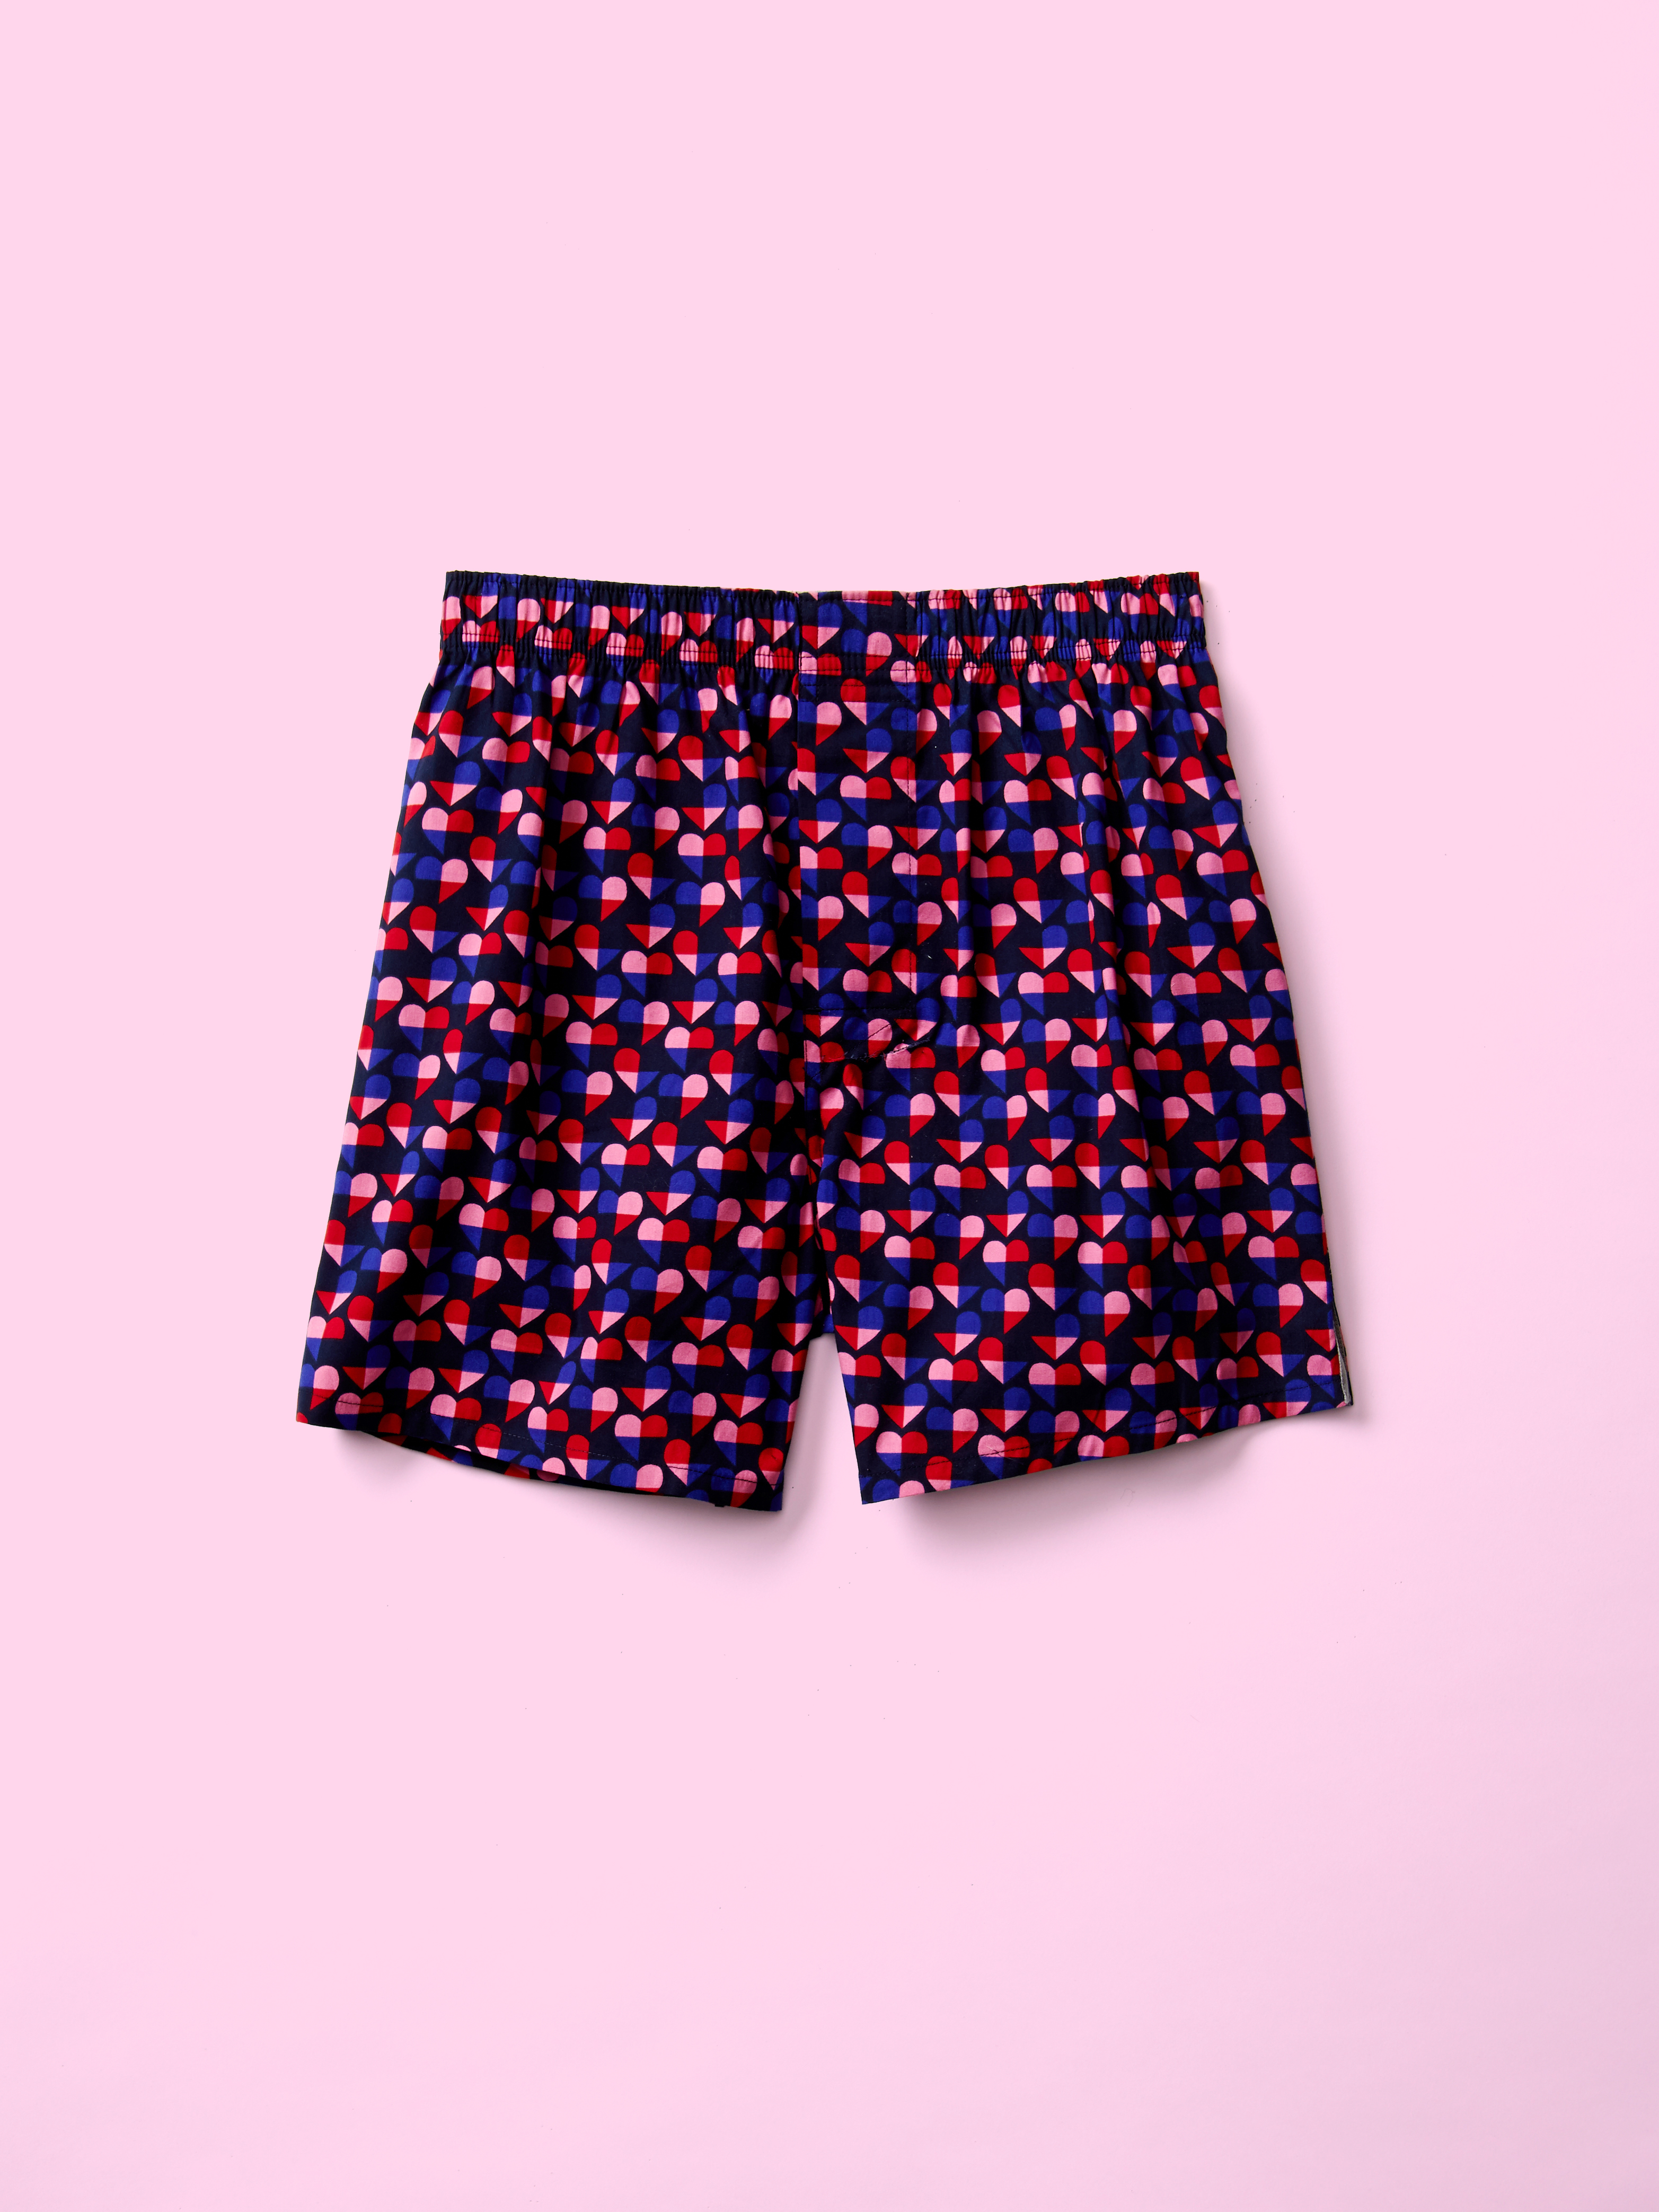 Geo Heart Boxers, available at